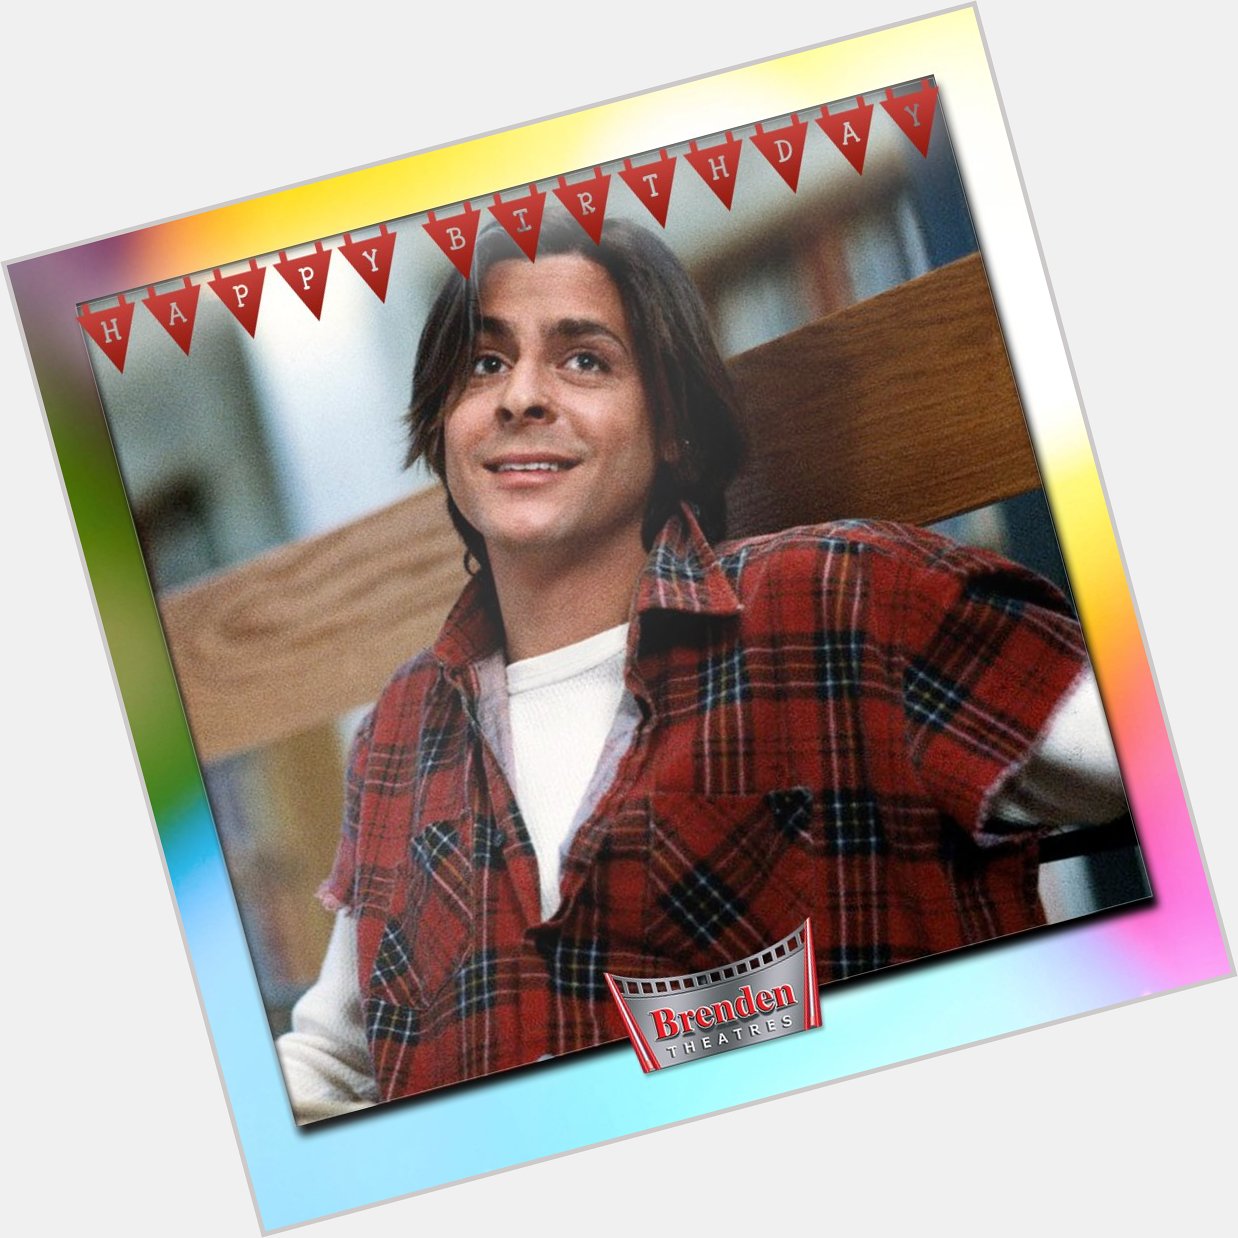 Happy birthday to Judd Nelson today! You\ll always be John Bender to us, Judd. 